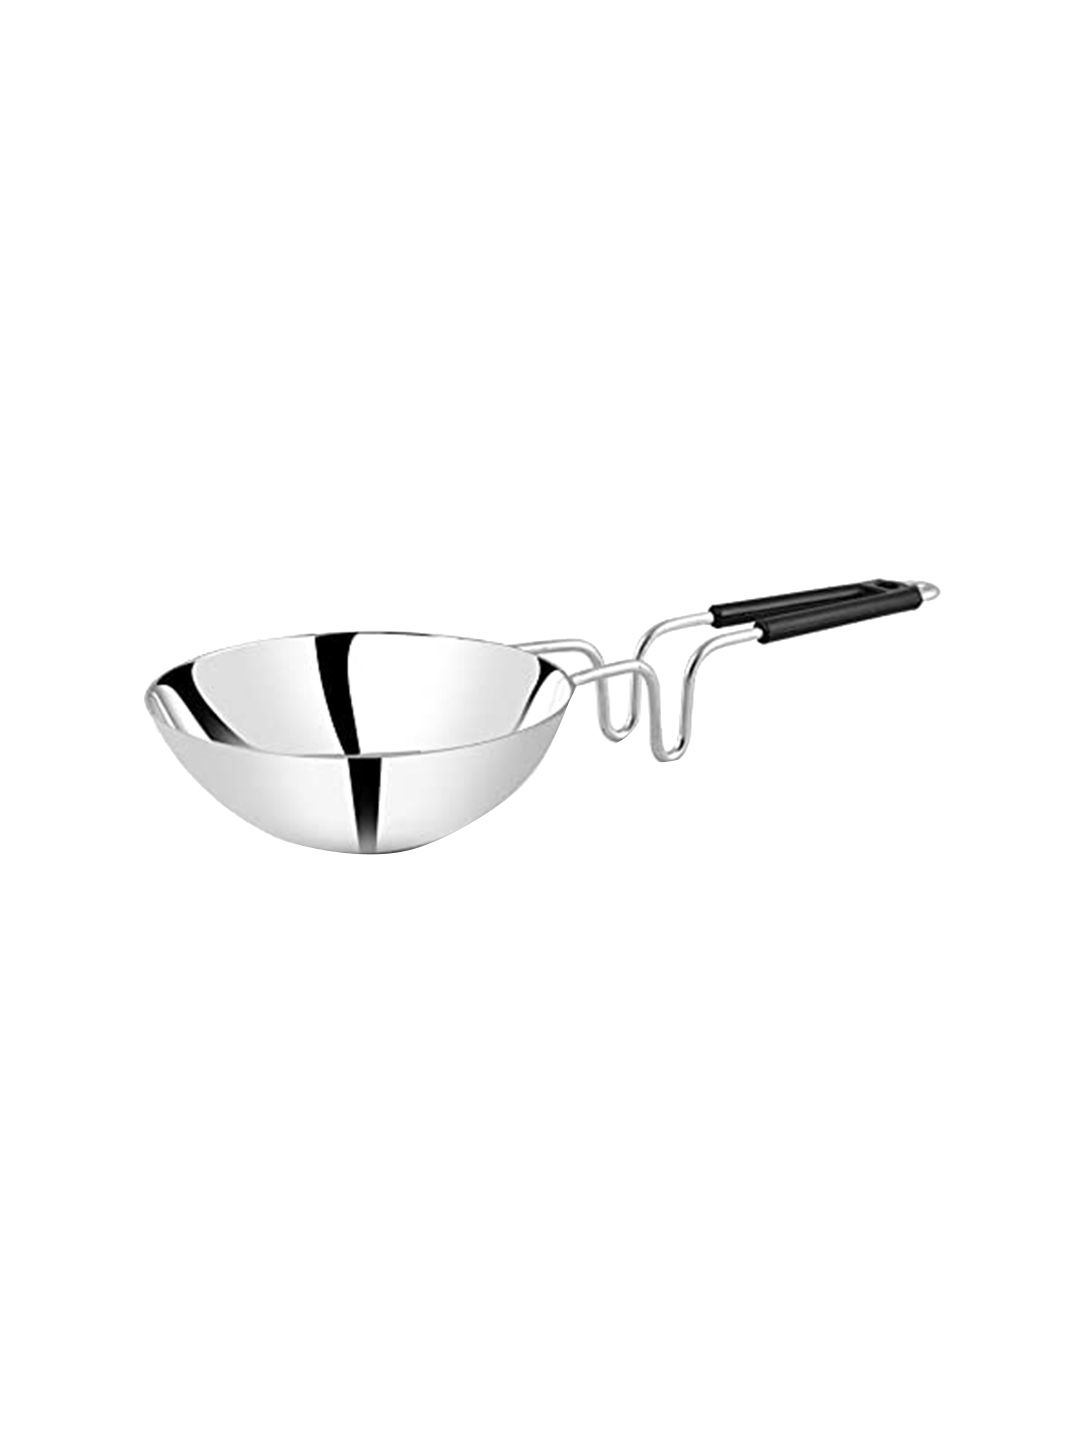 DREAM WEAVERZ Silver-Toned Solid Pure Stainless Steel Tadka Pan Price in India